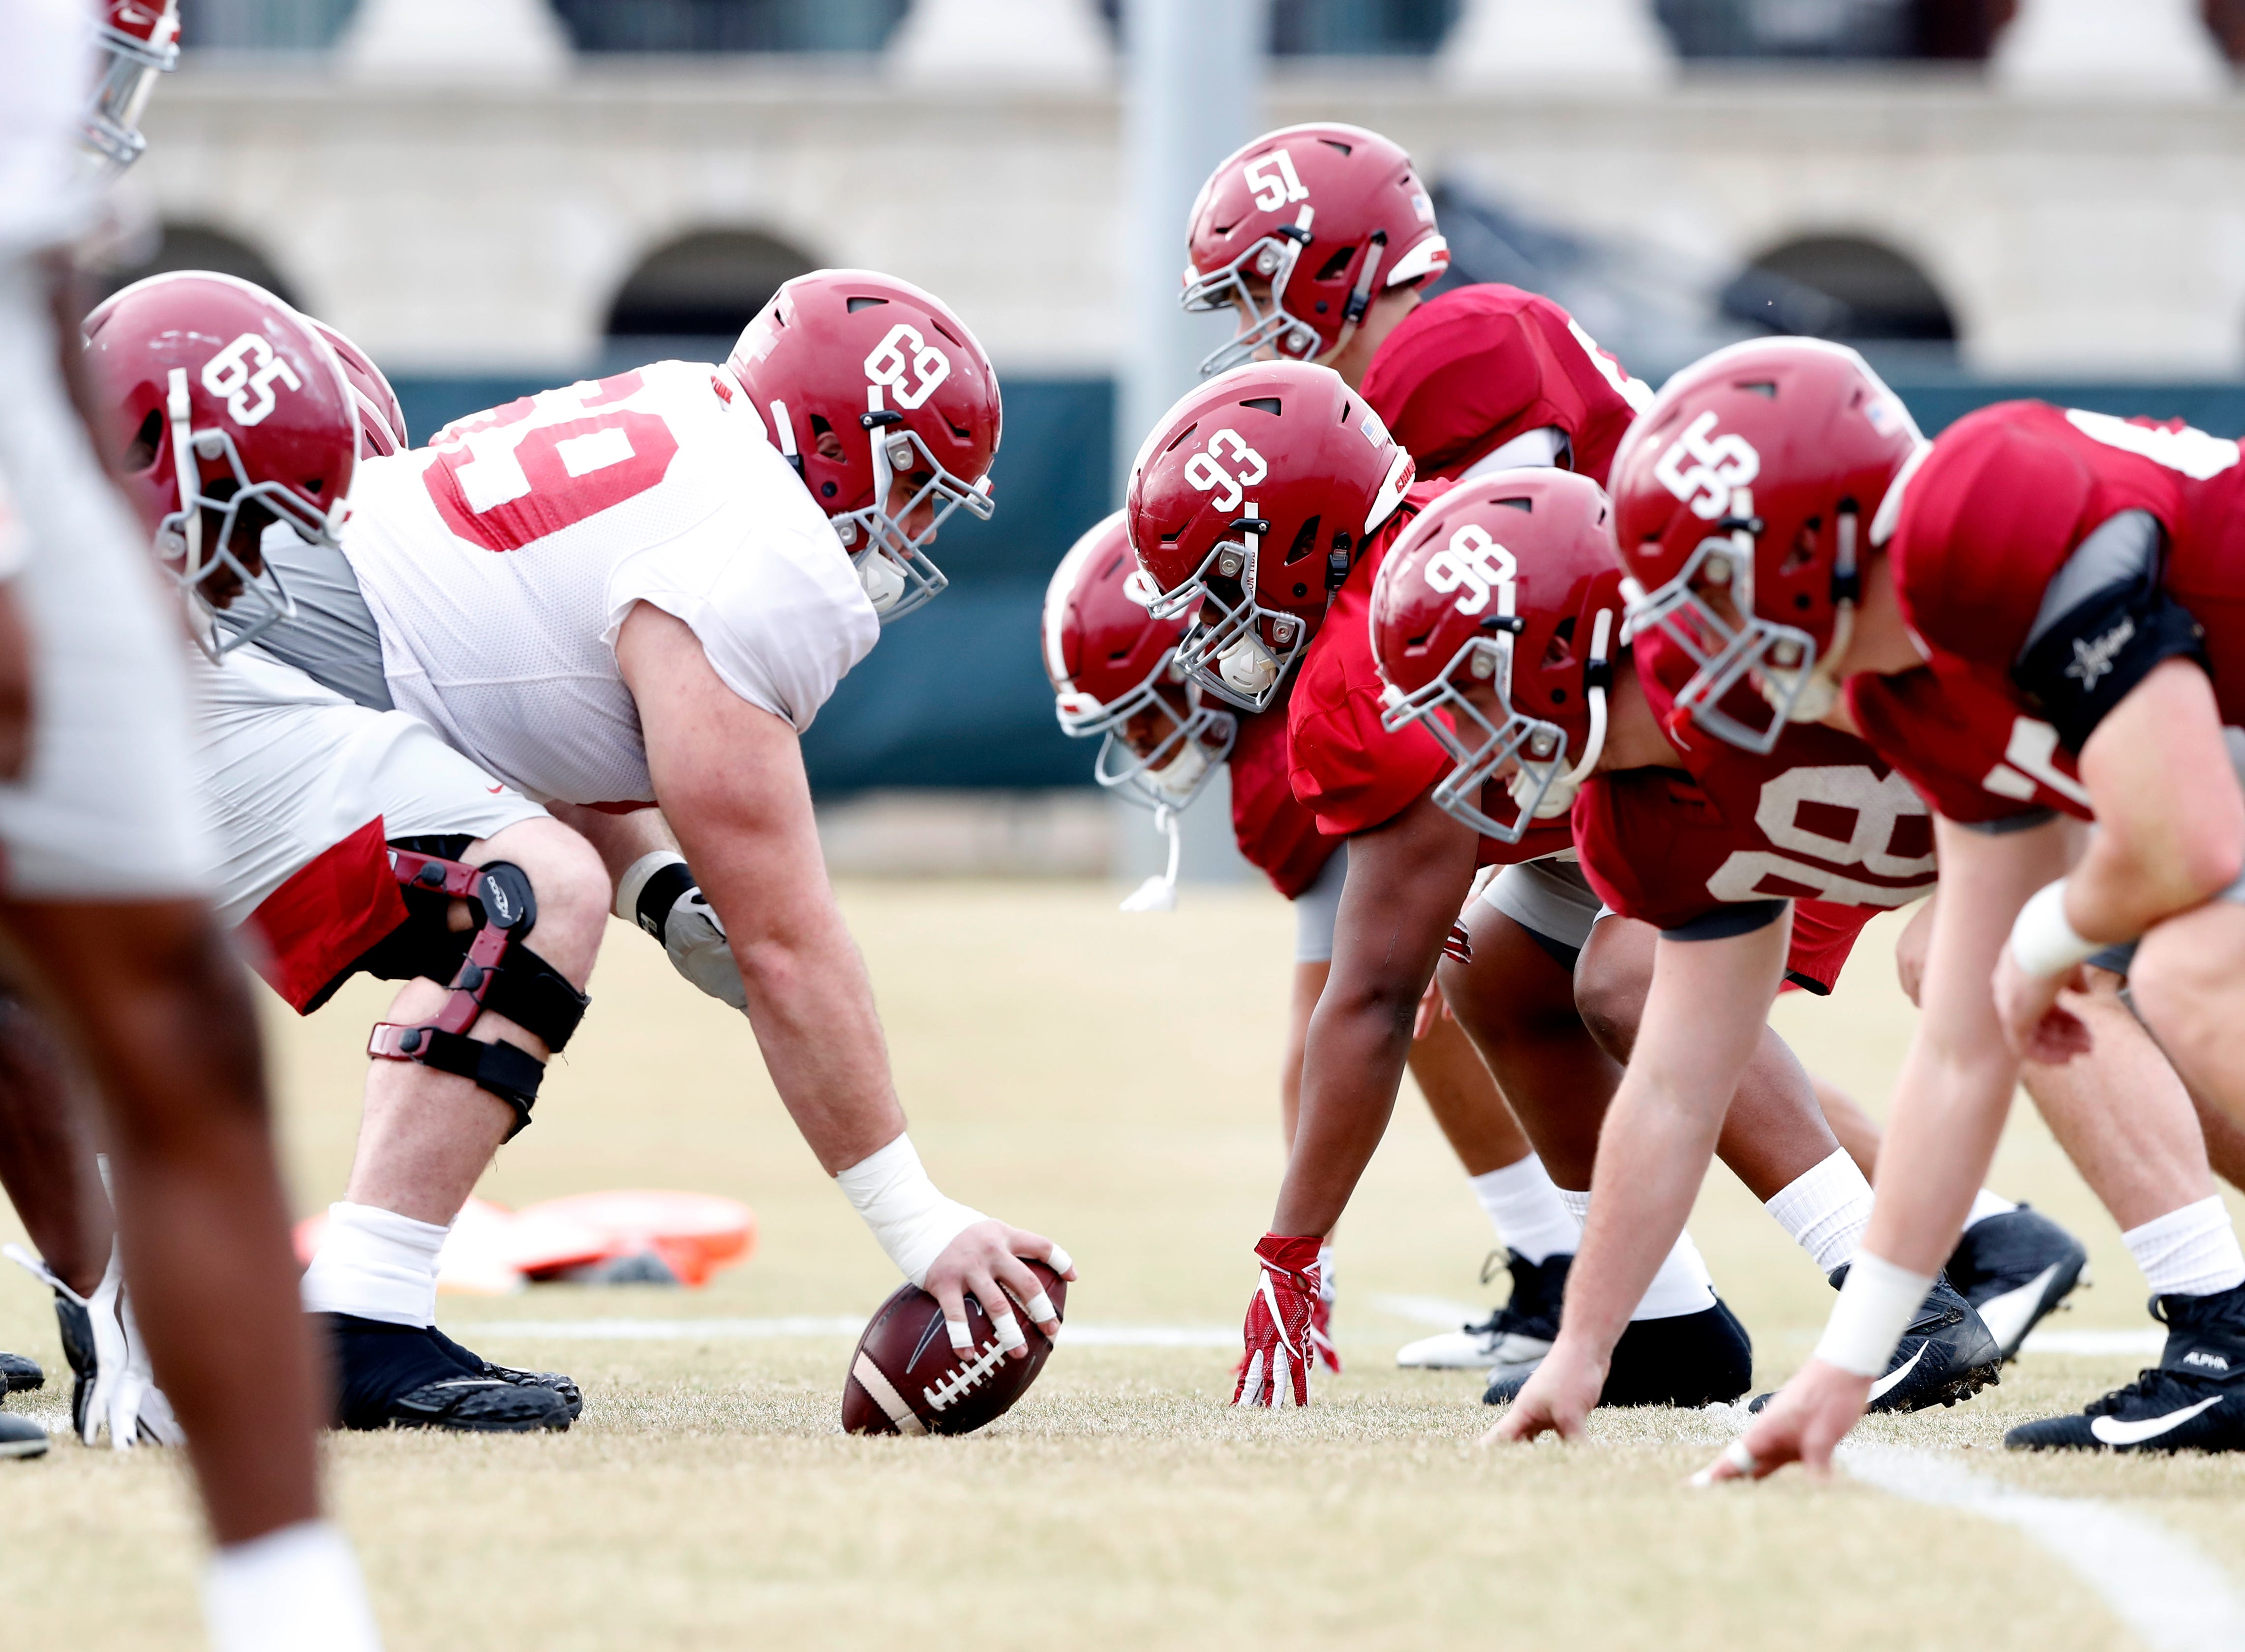 Alabama junior center Landon Dickerson (69) readies to snap the ball against the defense during a recent bowl practice Monday, Dec. 16, 2019 from the Thomas-Drew Practice Fields in Tuscaloosa. (Photo by Robert Sutton/Alabama athletics)